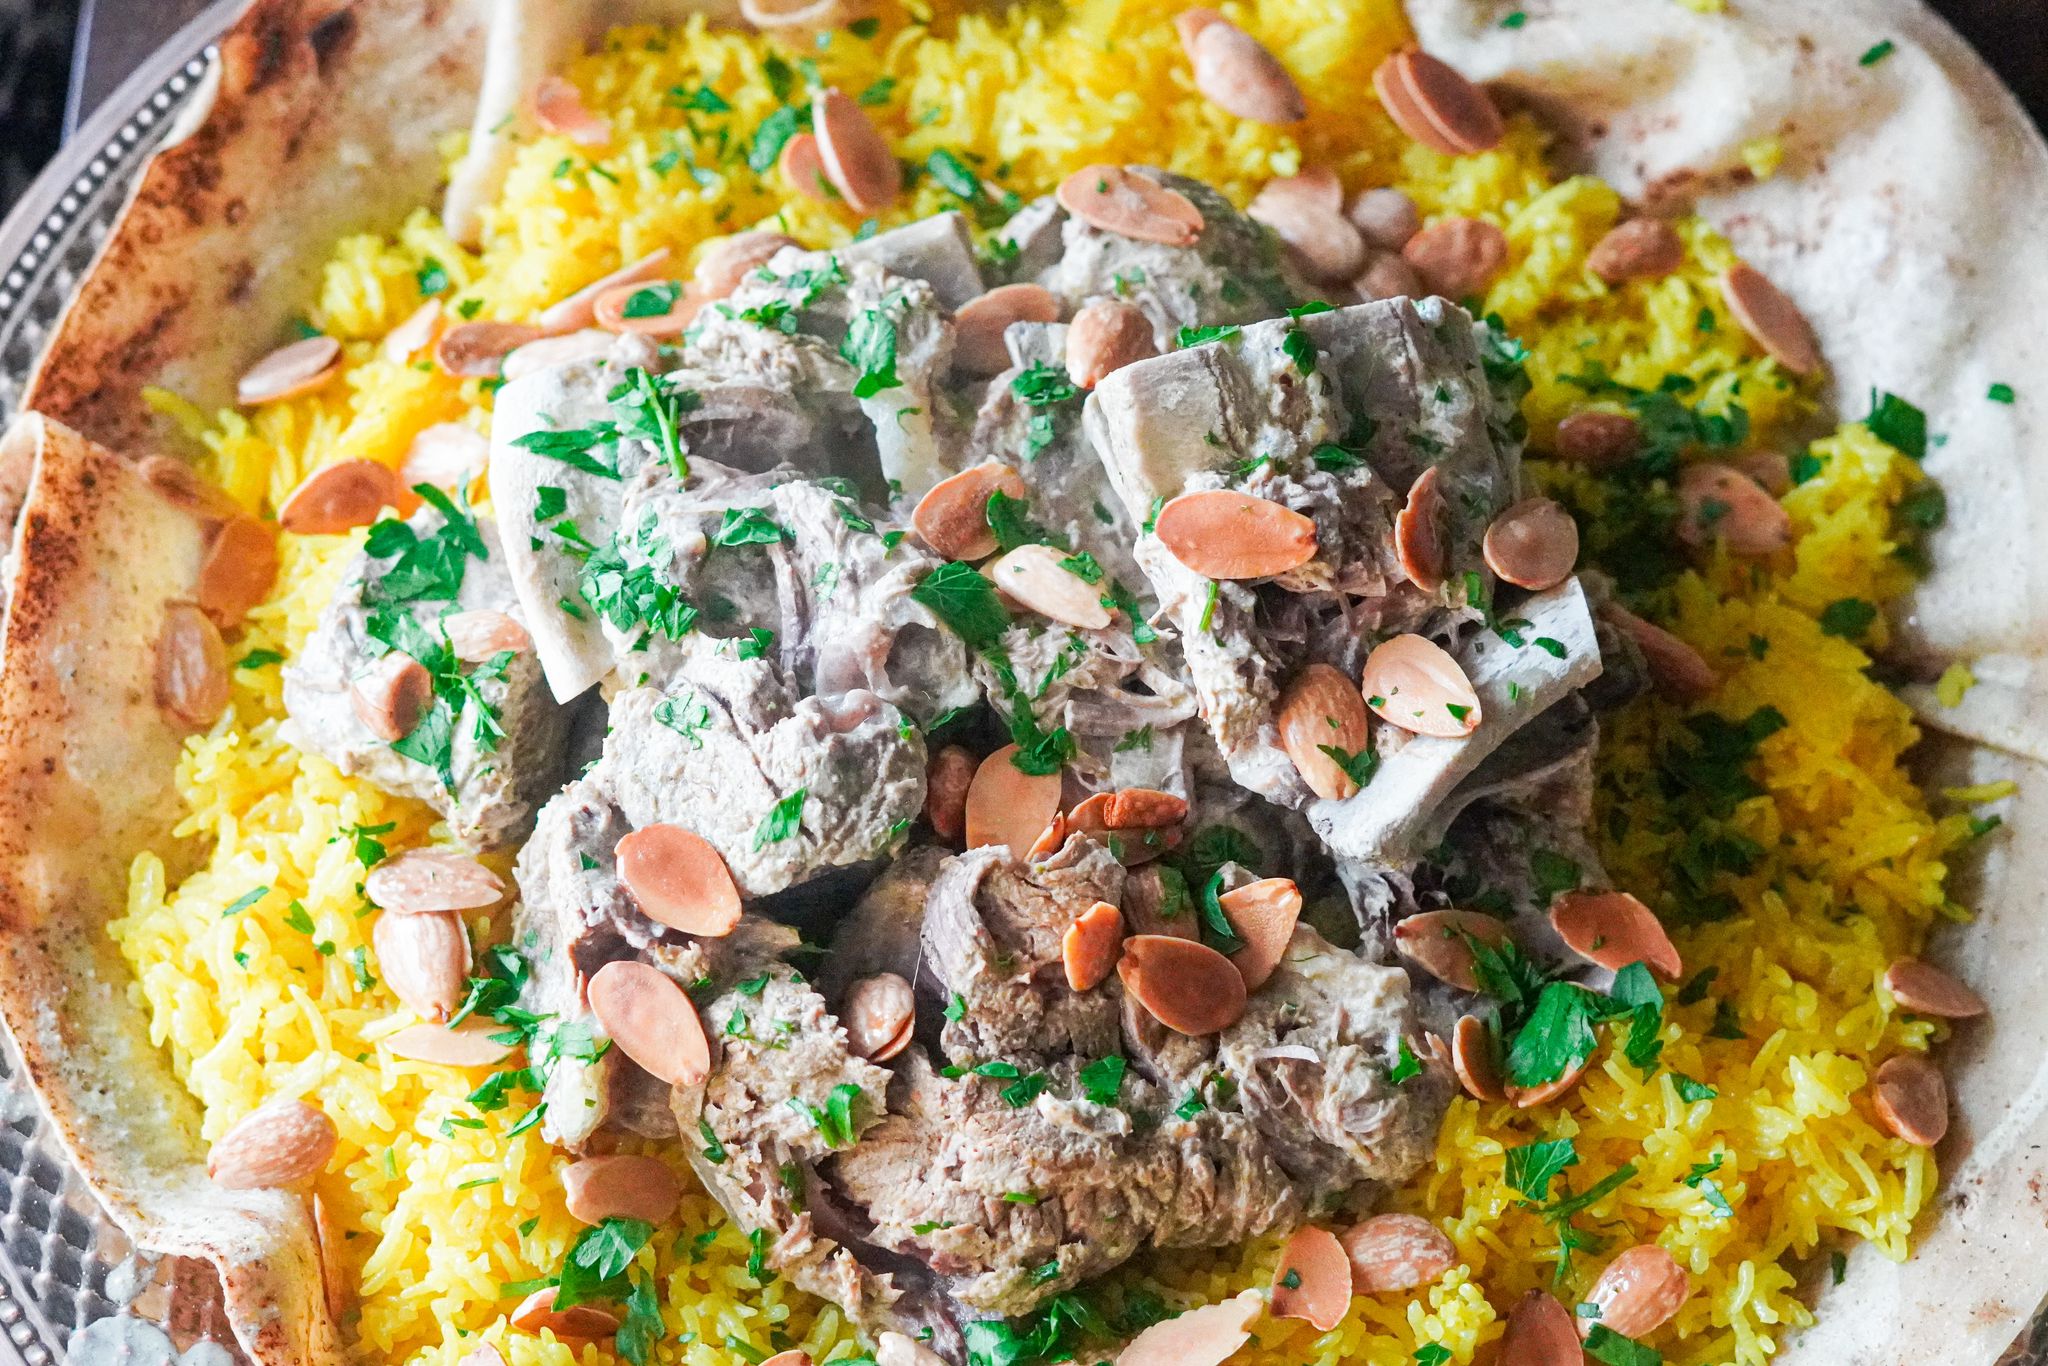 Mediterranean Mansaf is a traditional dish composed of layers of bread, rice, and tender chunks of lamb served with a special yogurt sauce